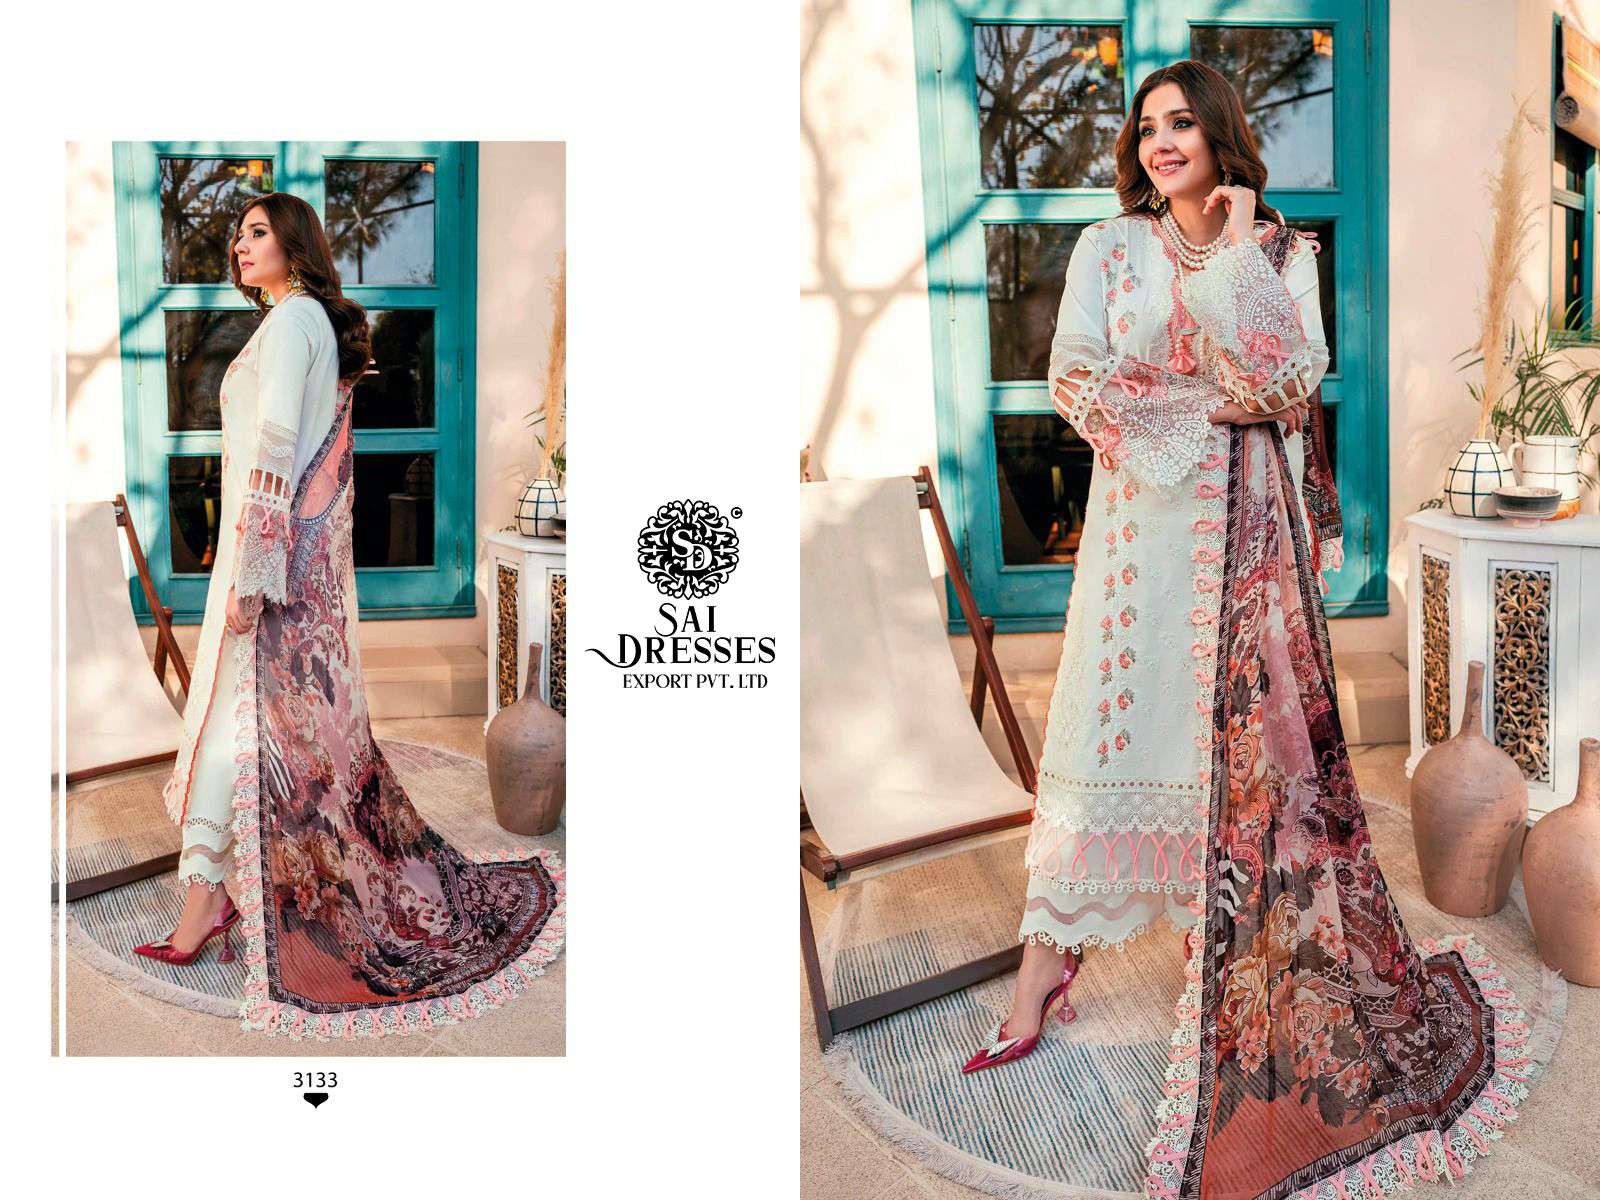 SAI DRESSES PRESENT FIRDOUS OMBRE VOL 2 NX SUMMER WEAR SELF EMBROIDERED FANCY PAKISTANI DESIGNER COLLECTION IN WHOLESALE RATE IN SURAT